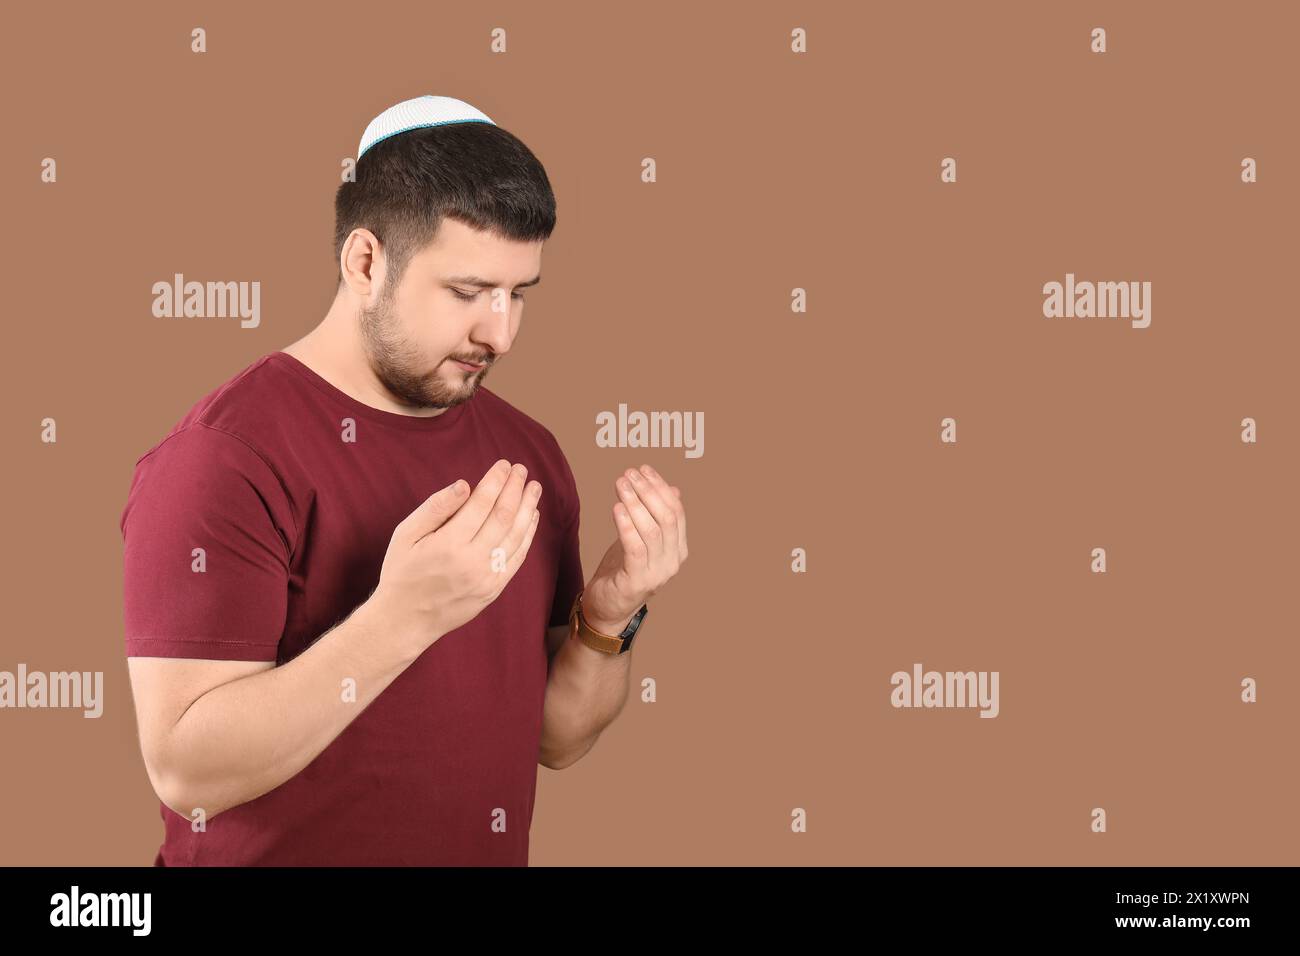 Young Jewish man in hat praying on brown background Stock Photo